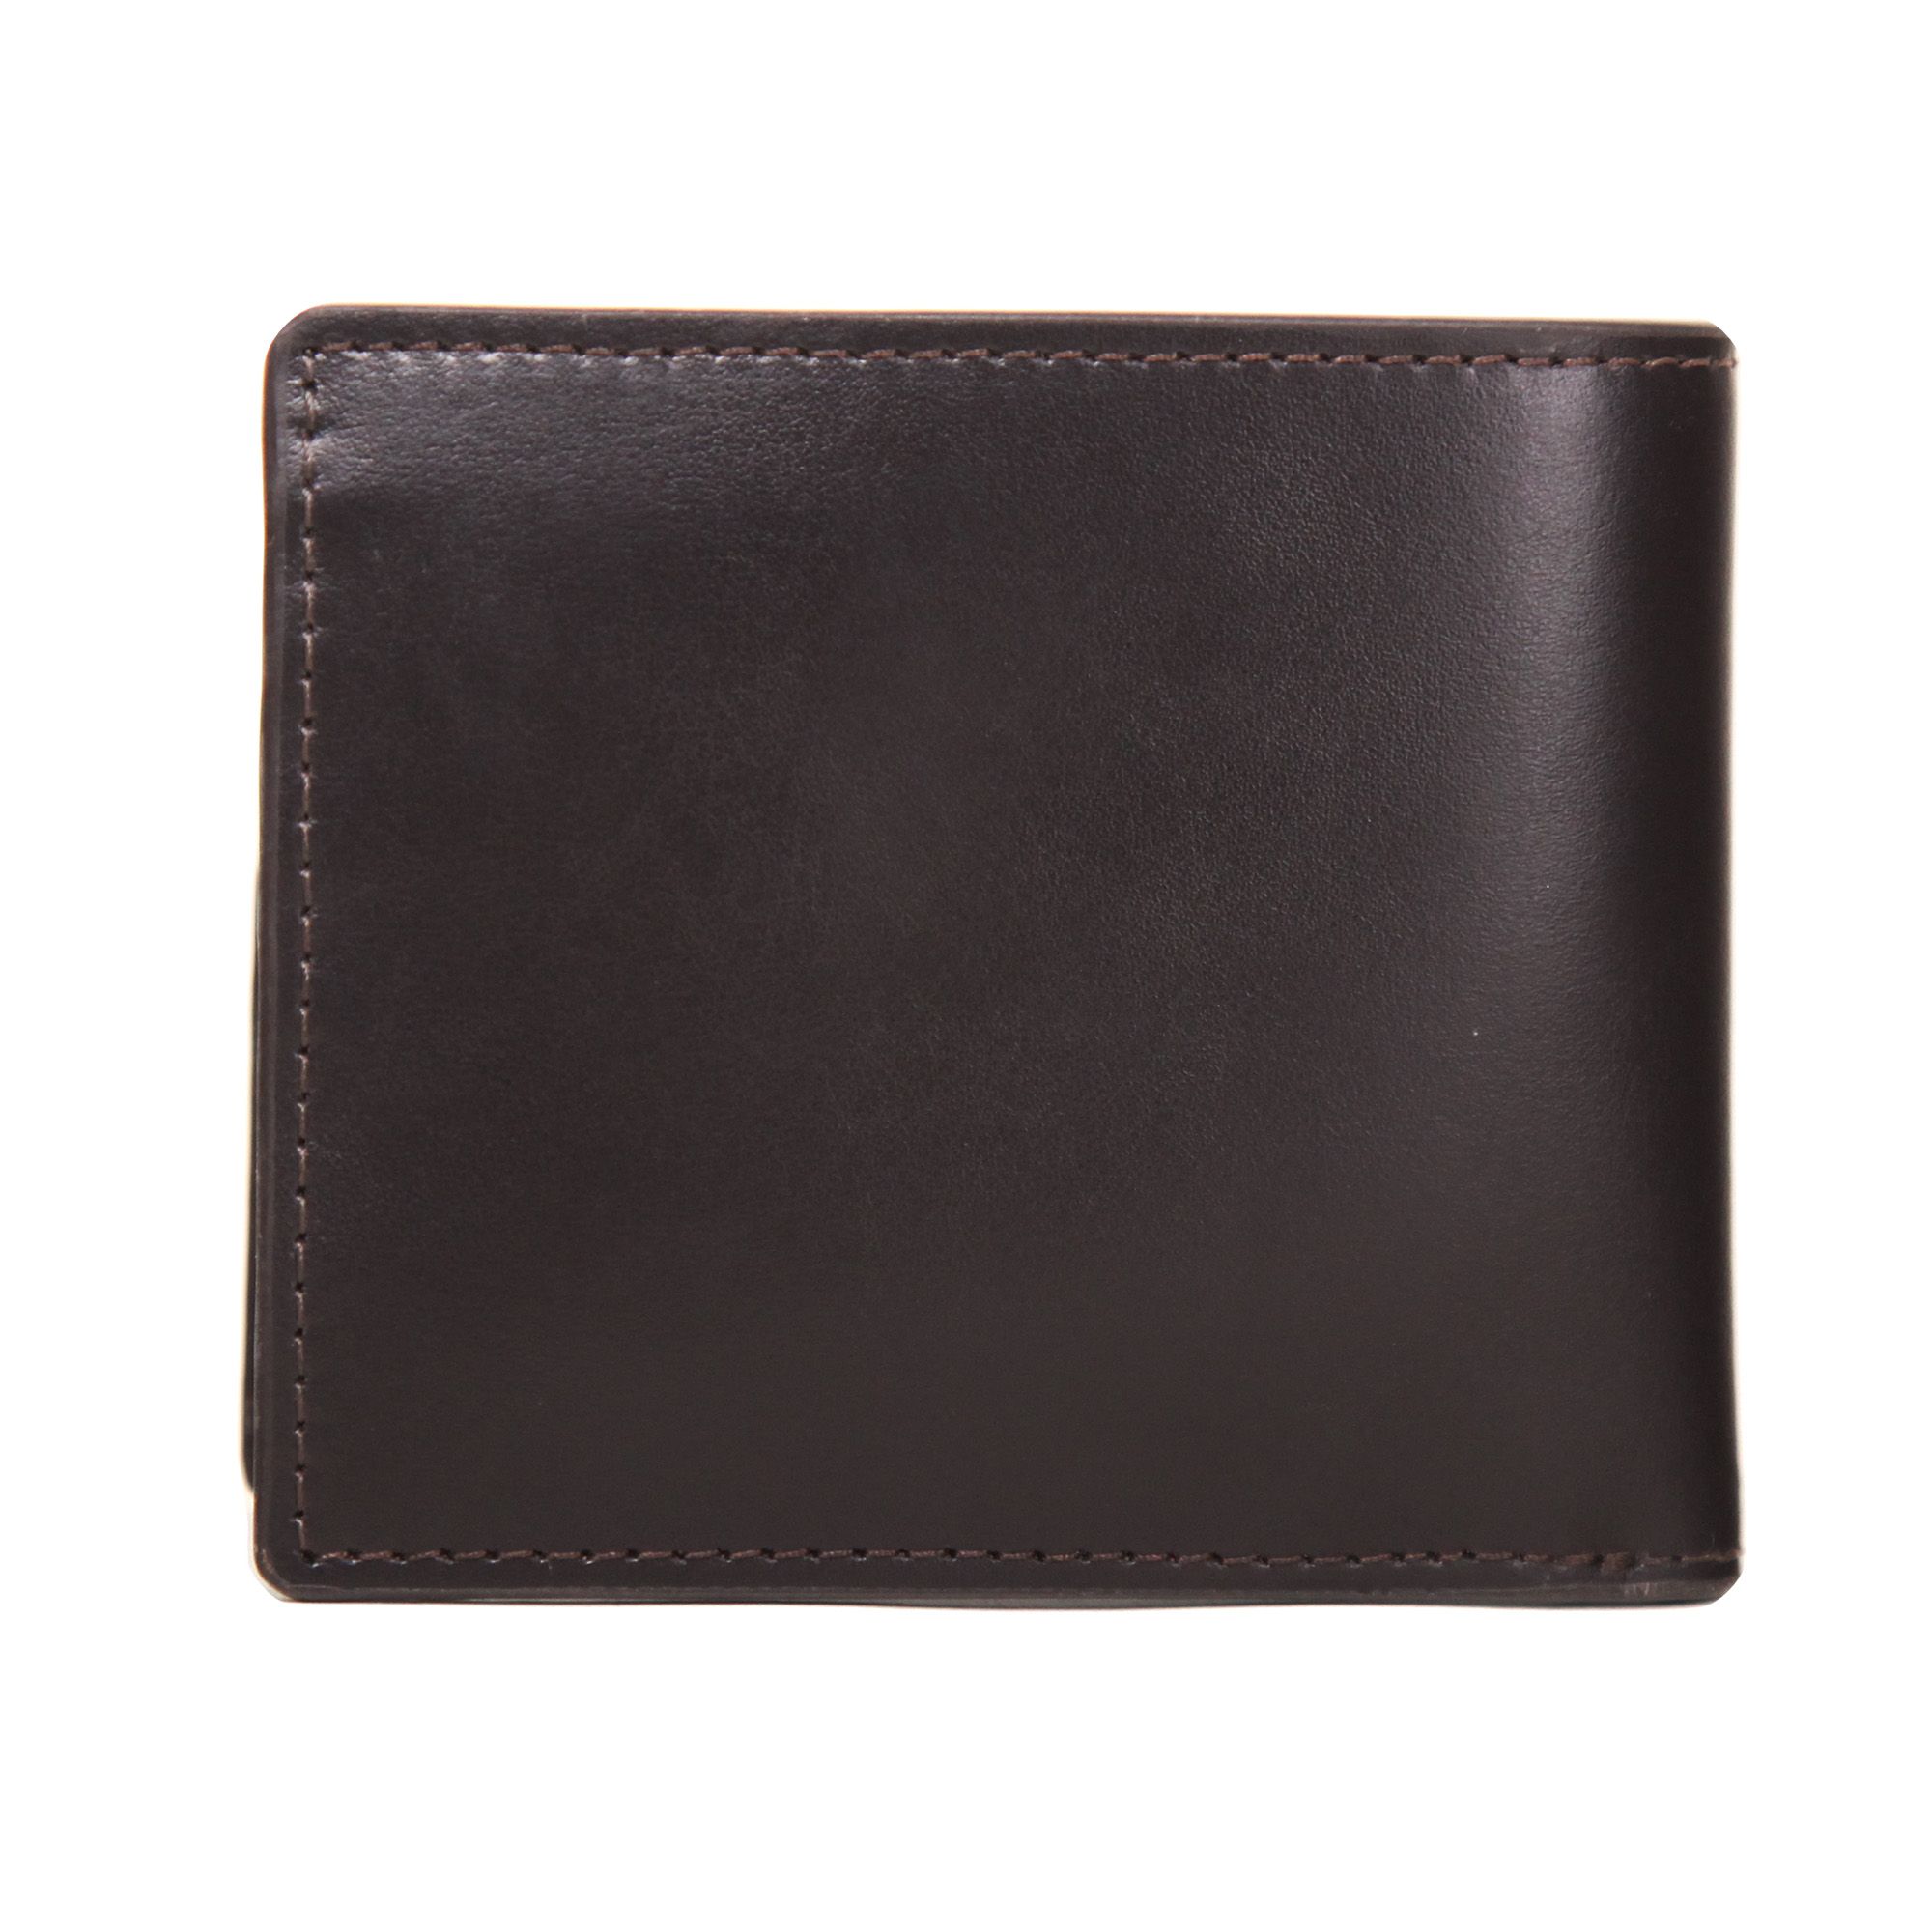 Brown Leather wallet for men